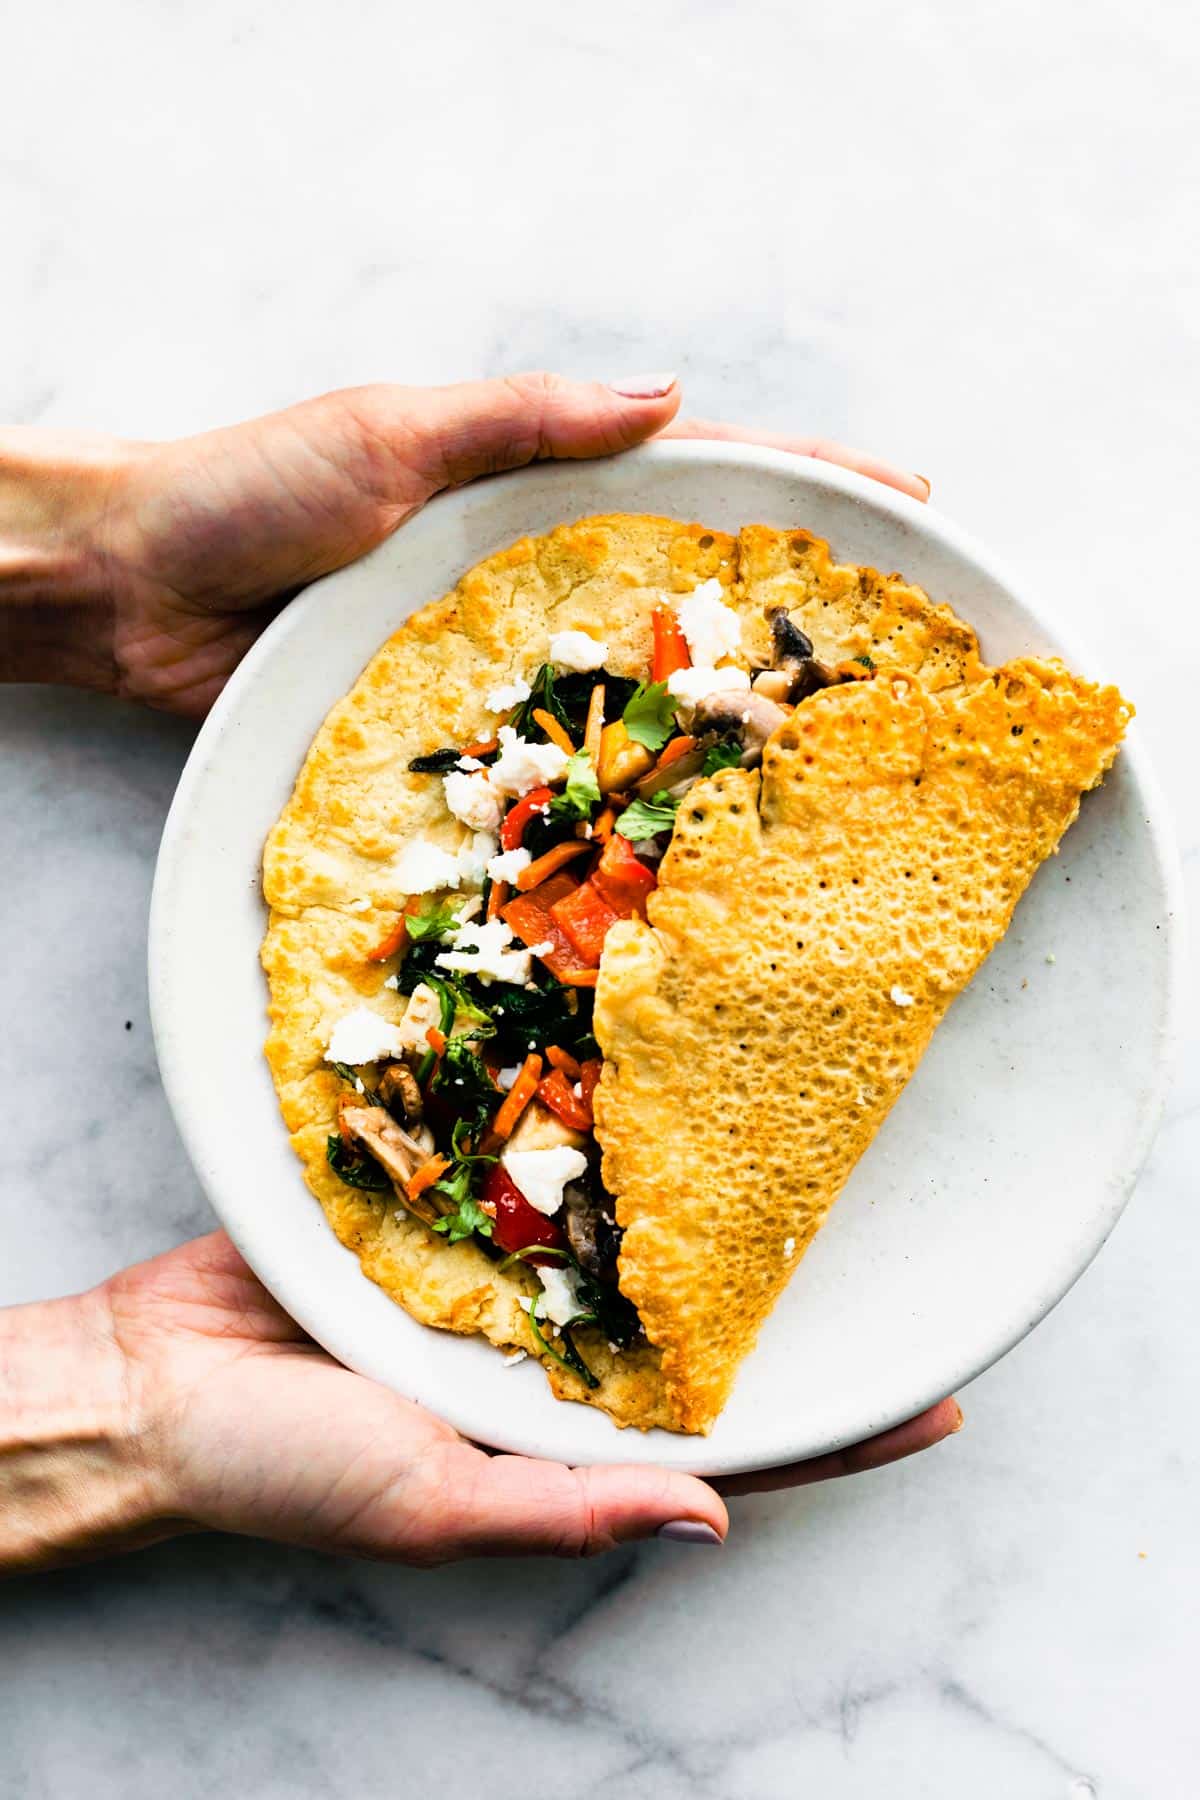 Hands holding a Savory Chickpea Pancake on a plate.